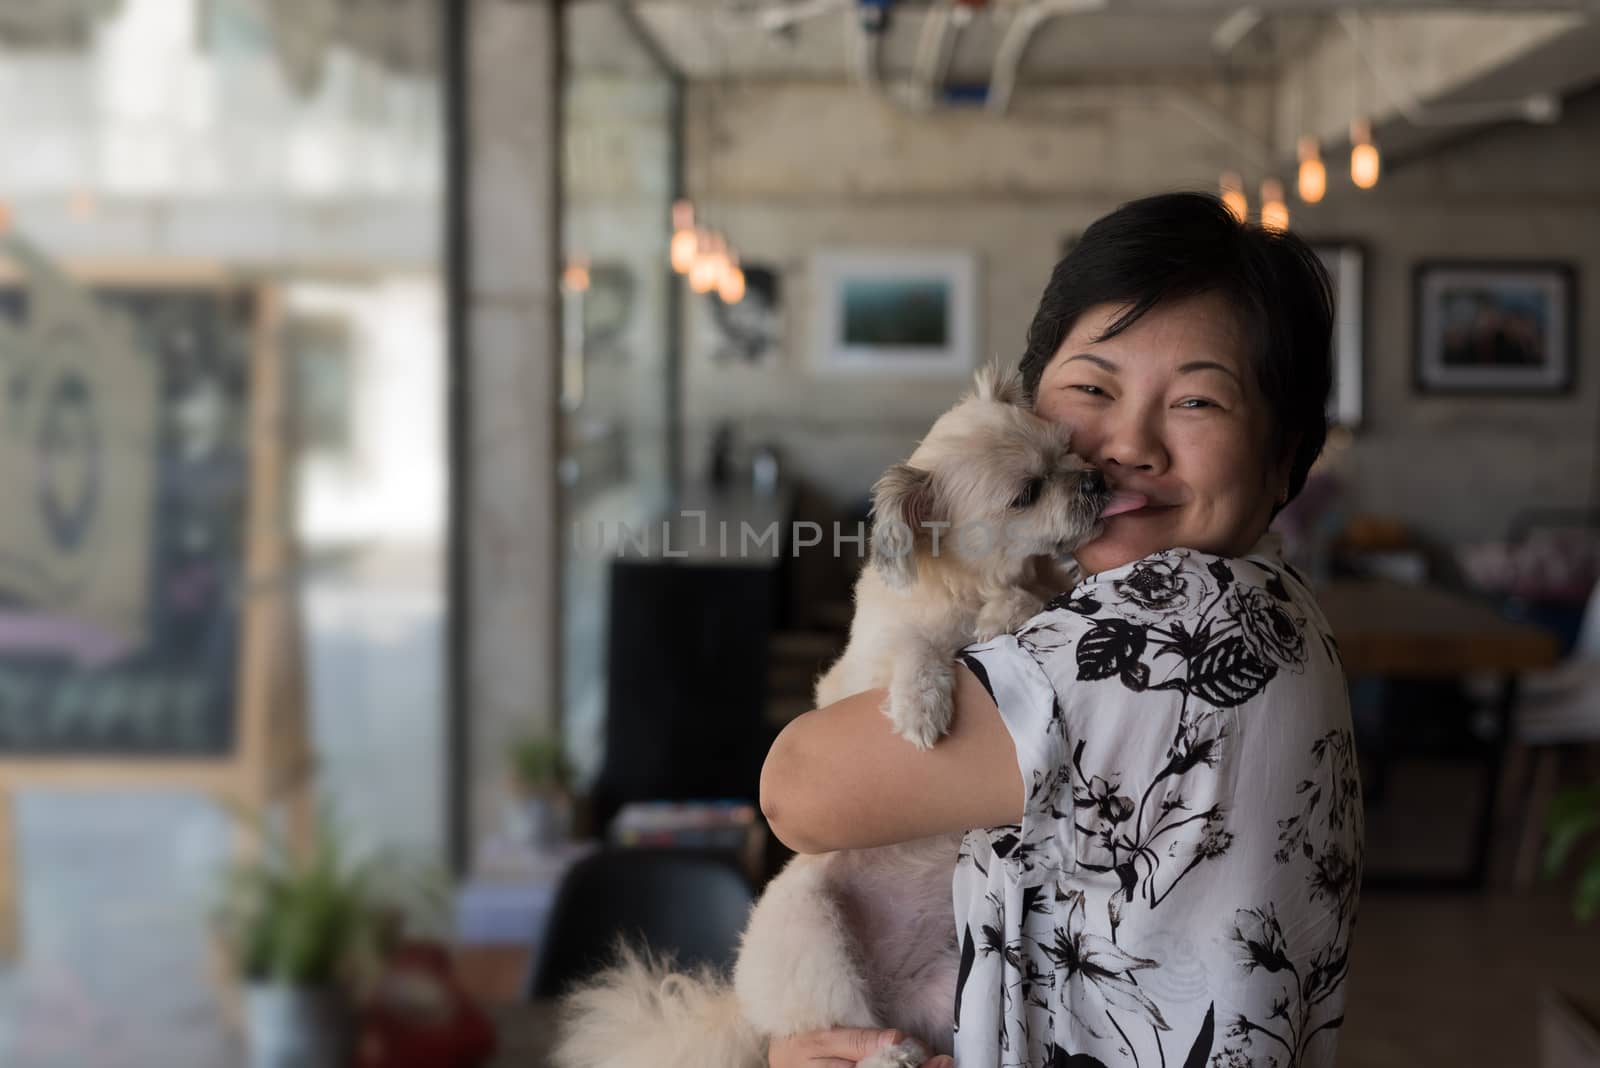 Asian woman and dog so cute mixed breed with Shih-Tzu, Pomeranian and Poodle in coffee shop cafe